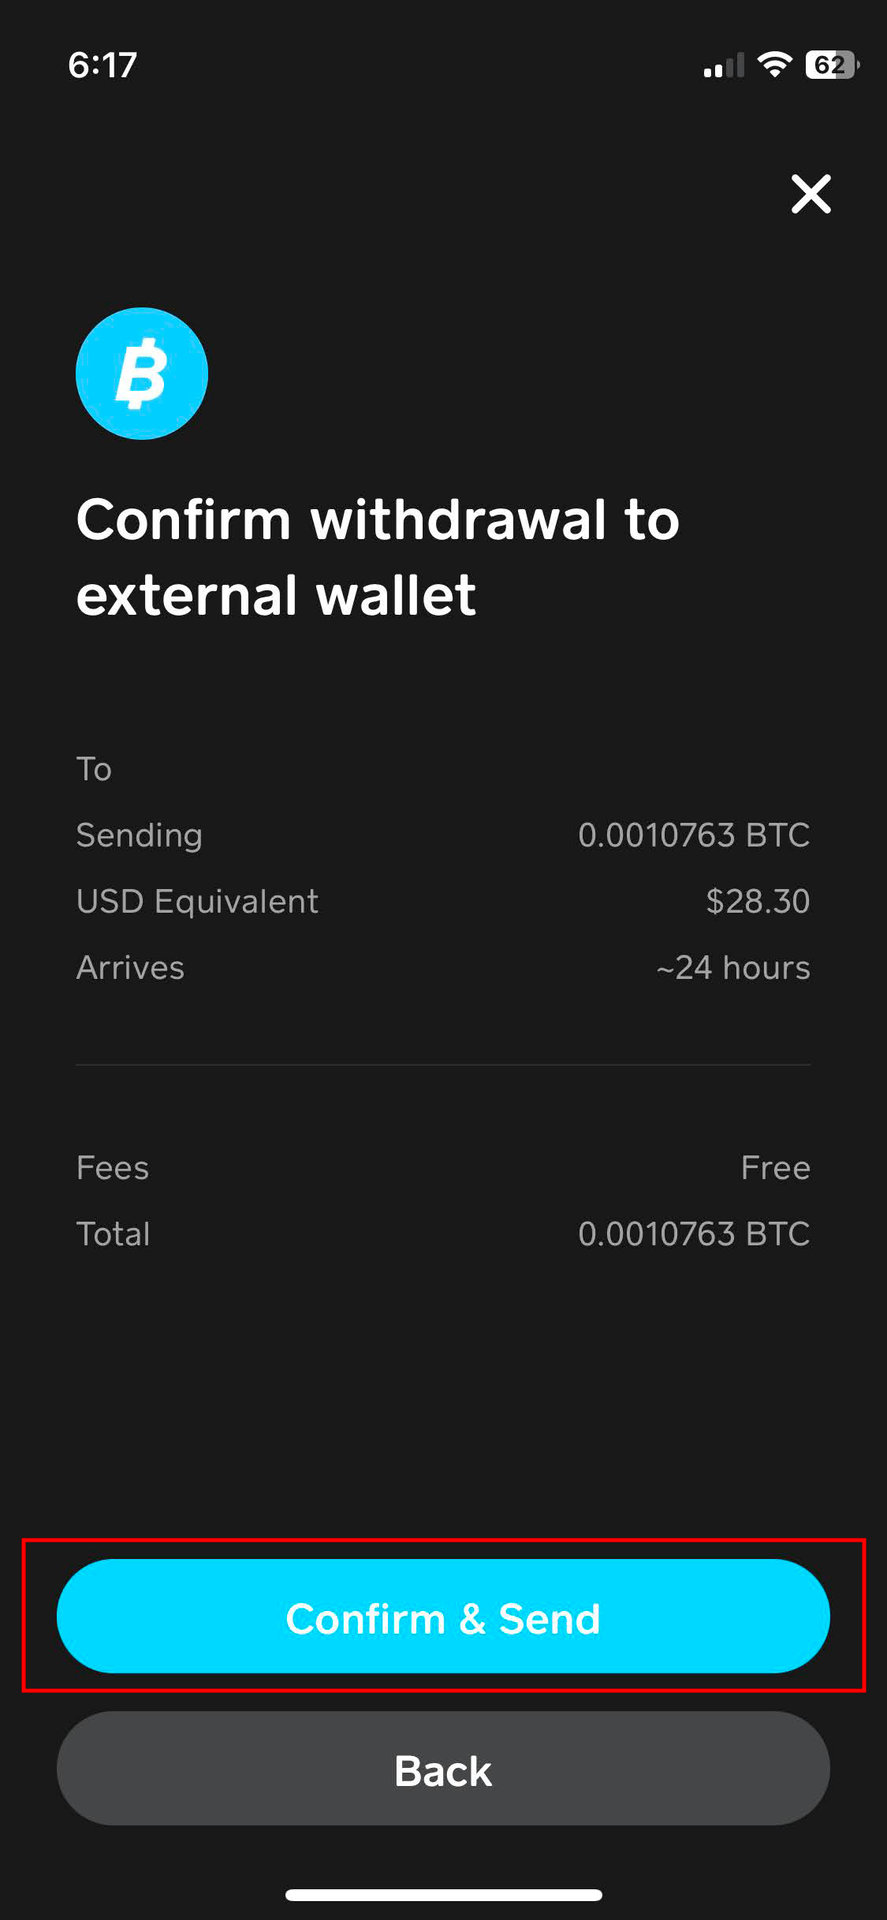 After entering the amount, confirm the transaction details and tap on the 